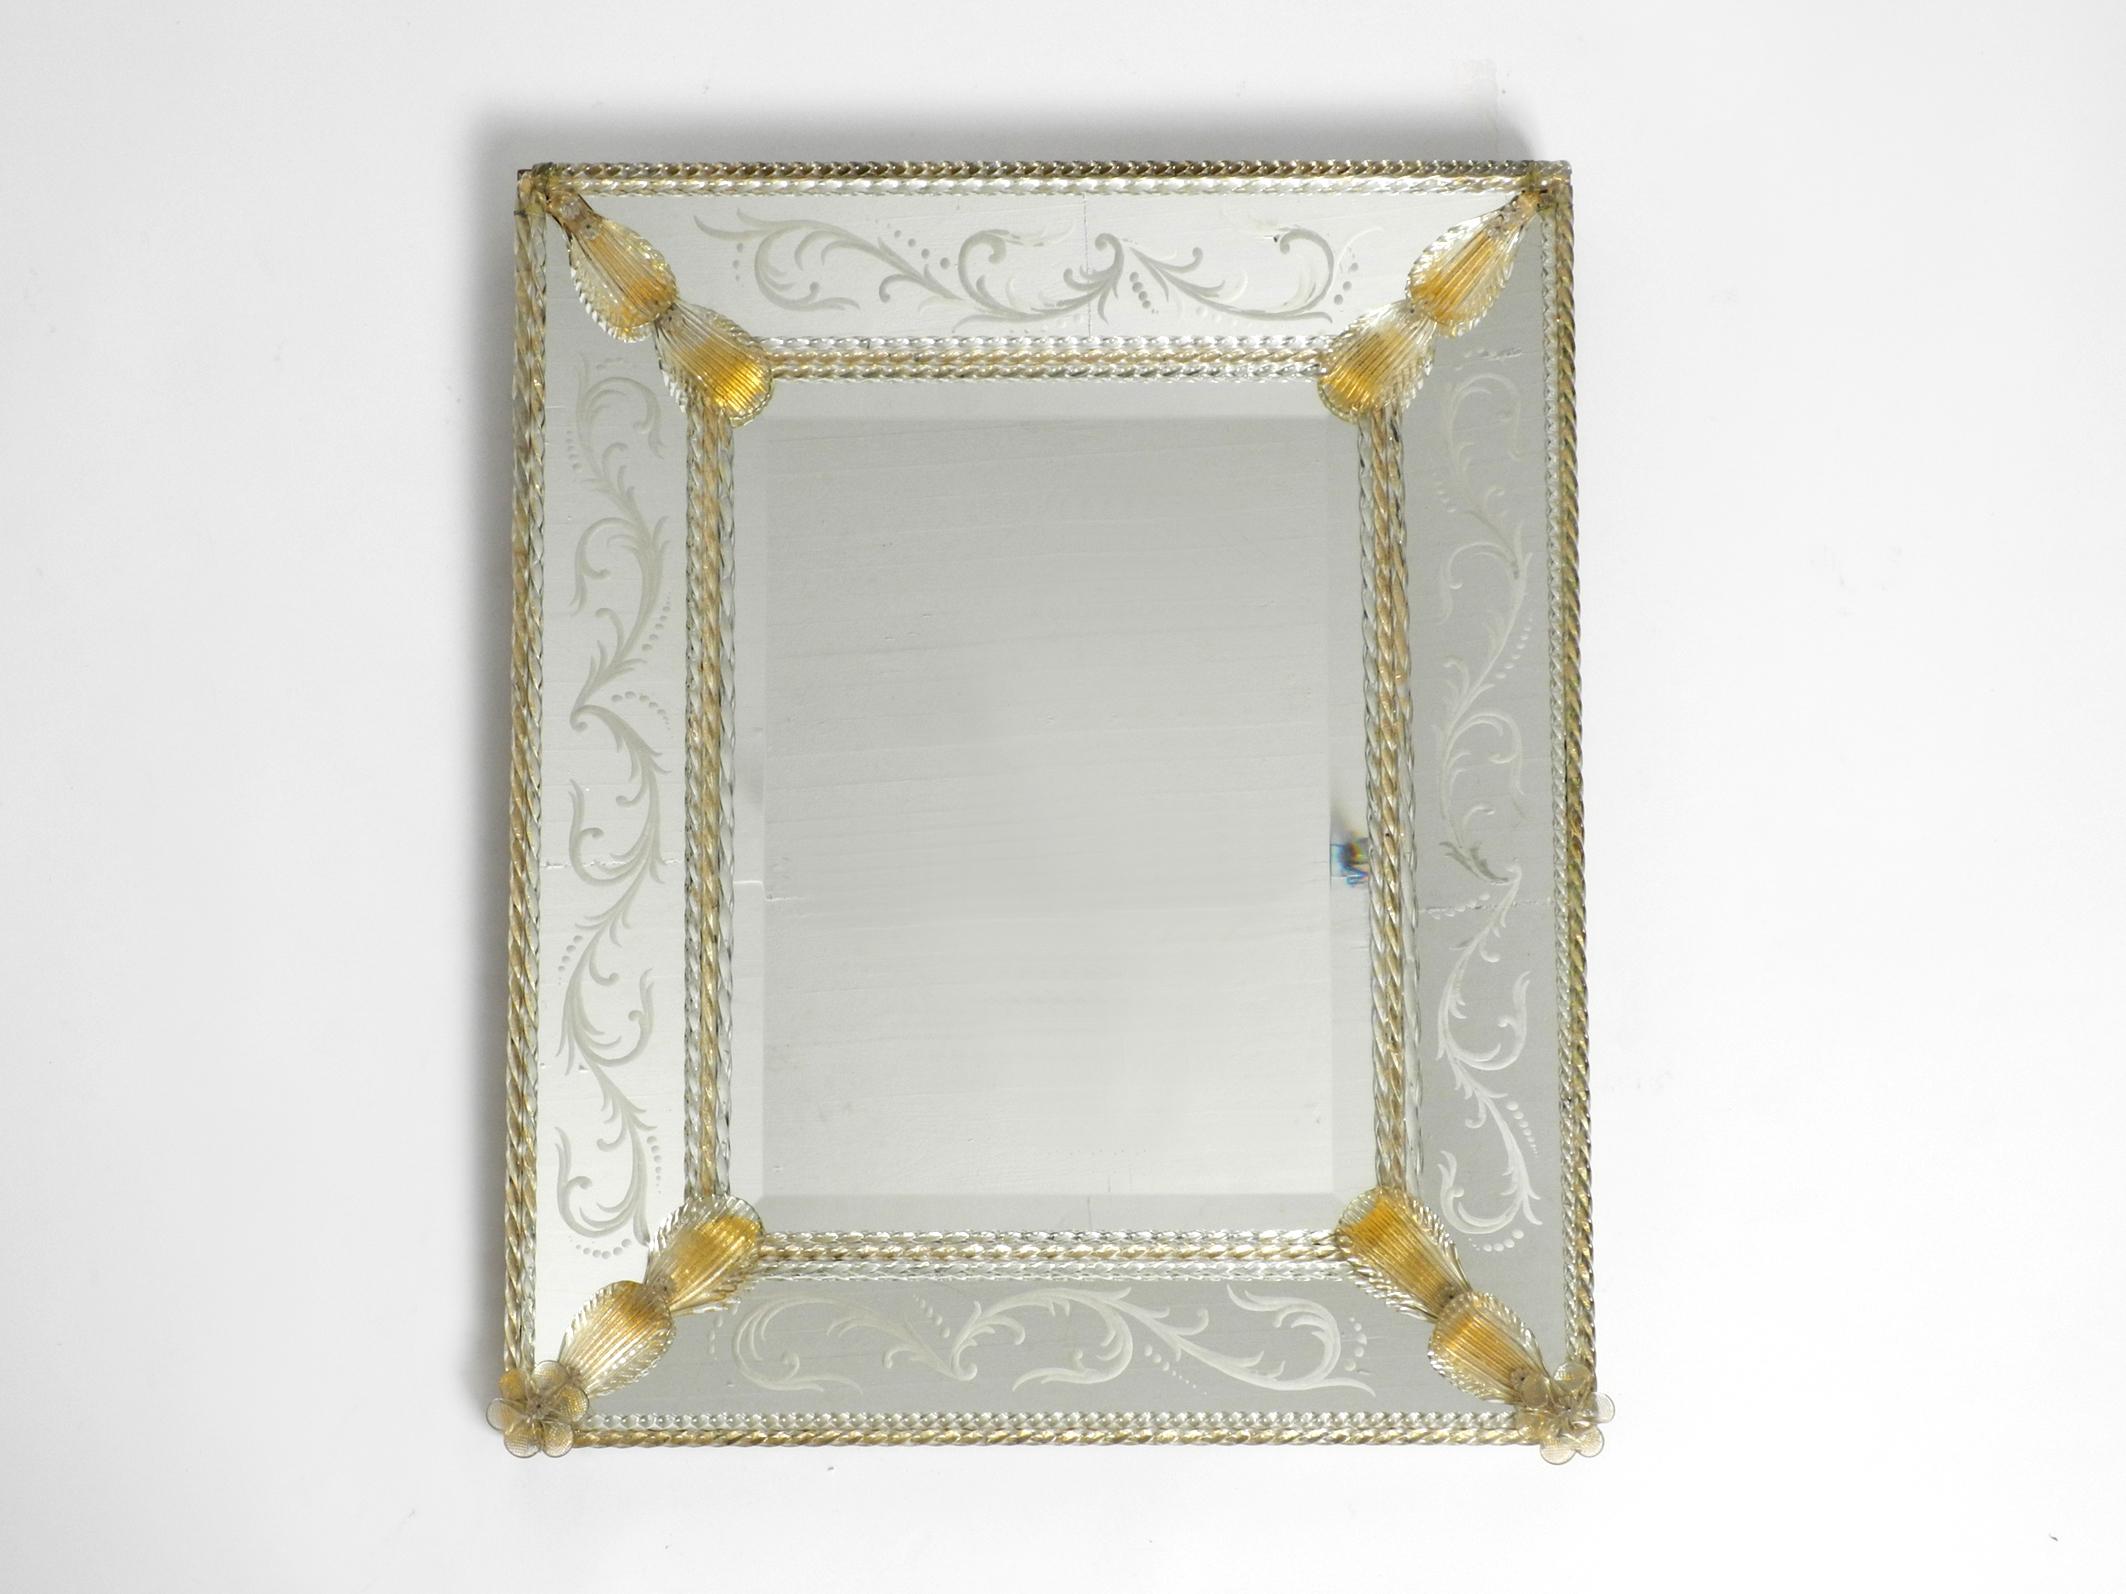 Very rare, stunning beautiful Italian midcentury wall mirror with an elaborate Murano glass frame.
Manufacturer is Barovier & Toso. Made in Italy
Very high-quality workmanship with individual Murano glass rods and leaves.
The inner mirror is